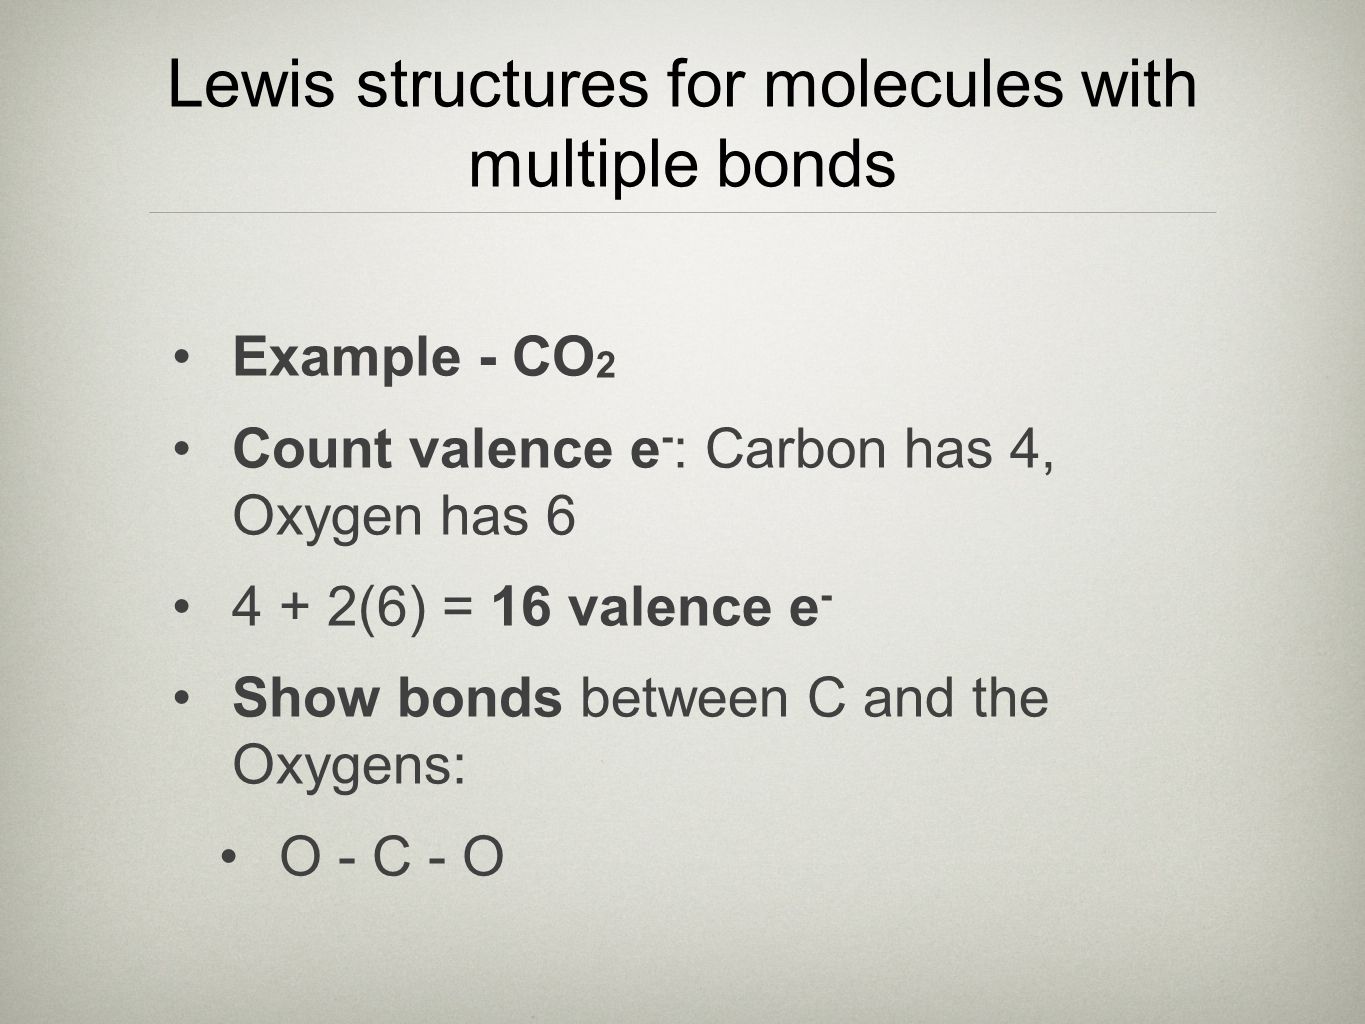 Lewis structures for molecules with multiple bonds Example - CO 2 Count valence e - : Carbon has 4, Oxygen has (6) = 16 valence e - Show bonds between C and the Oxygens: O - C - O